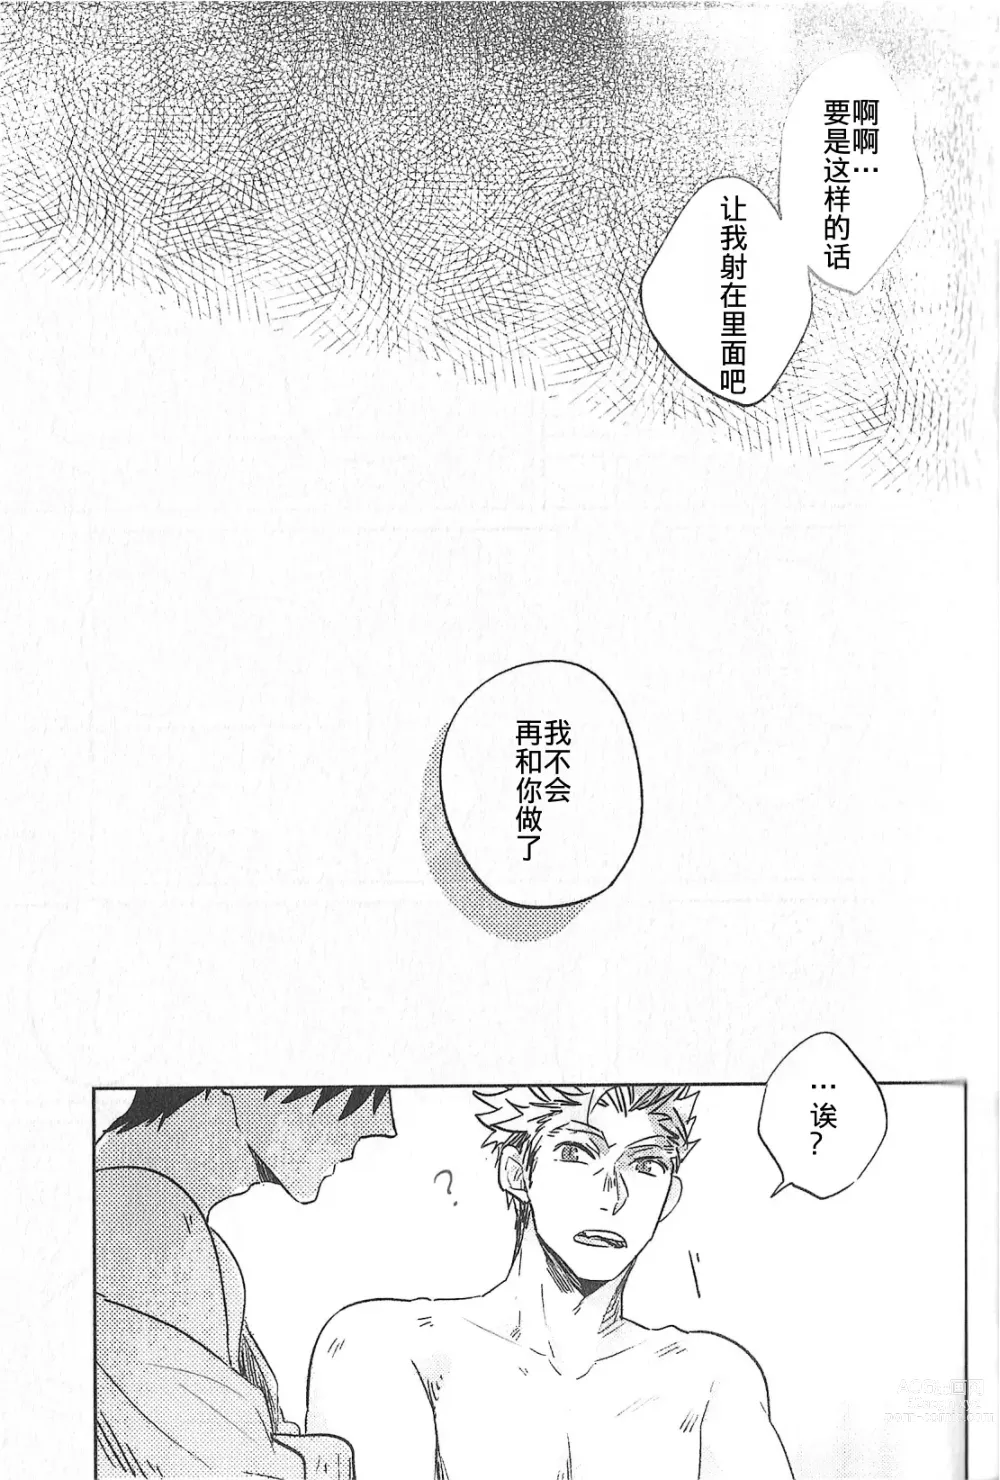 Page 10 of doujinshi 极境的野兽 后篇